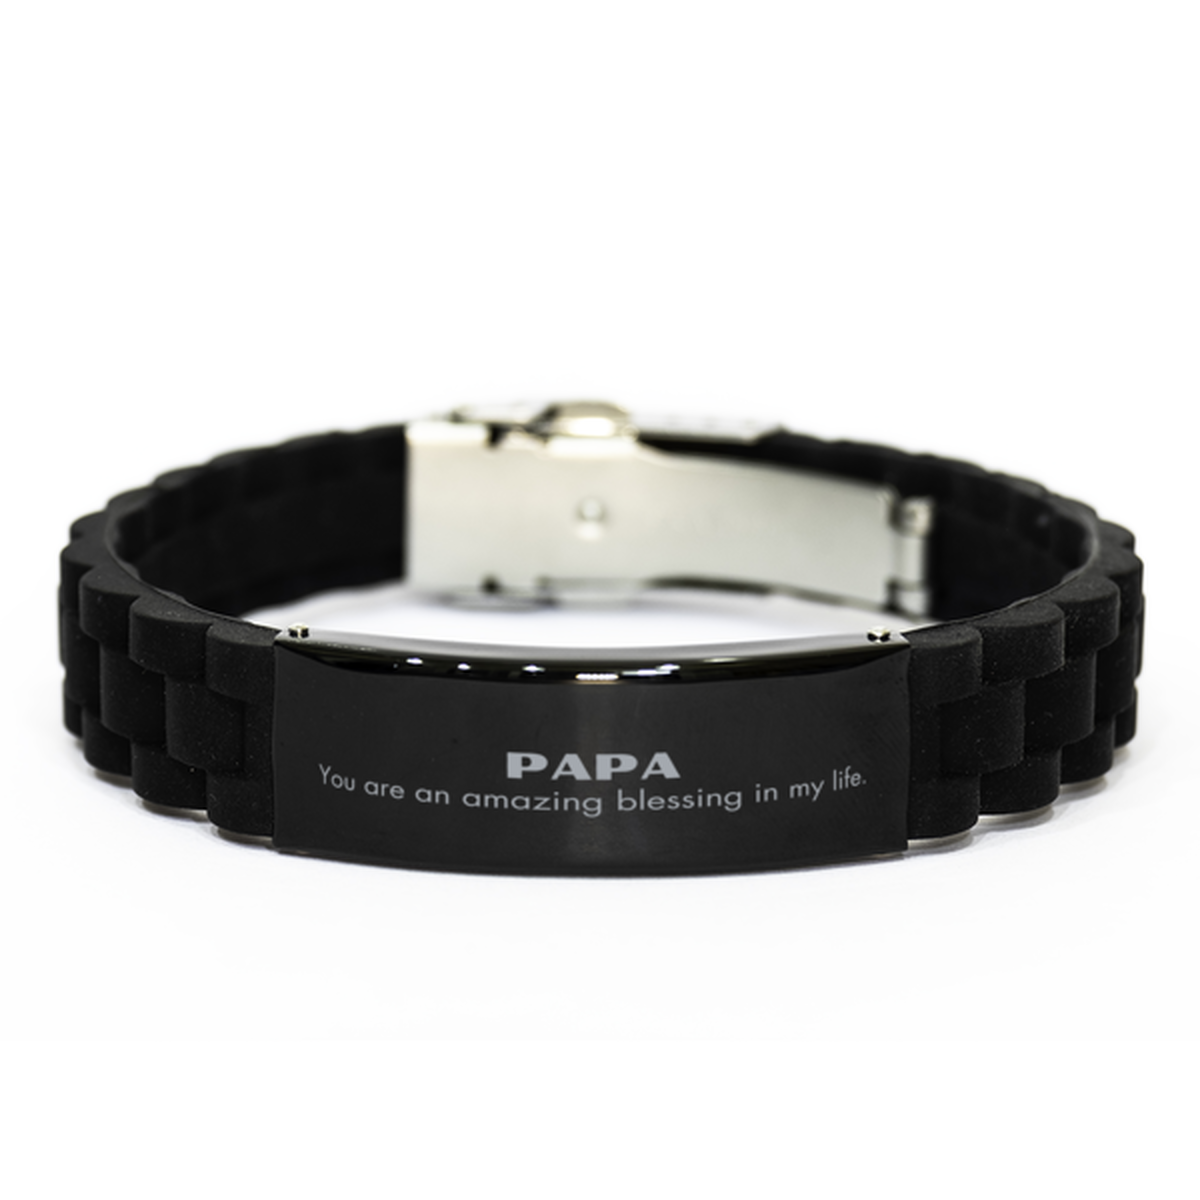 Papa Black Glidelock Clasp Bracelet, You are an amazing blessing in my life, Thank You Gifts For Papa, Inspirational Birthday Christmas Unique Gifts For Papa